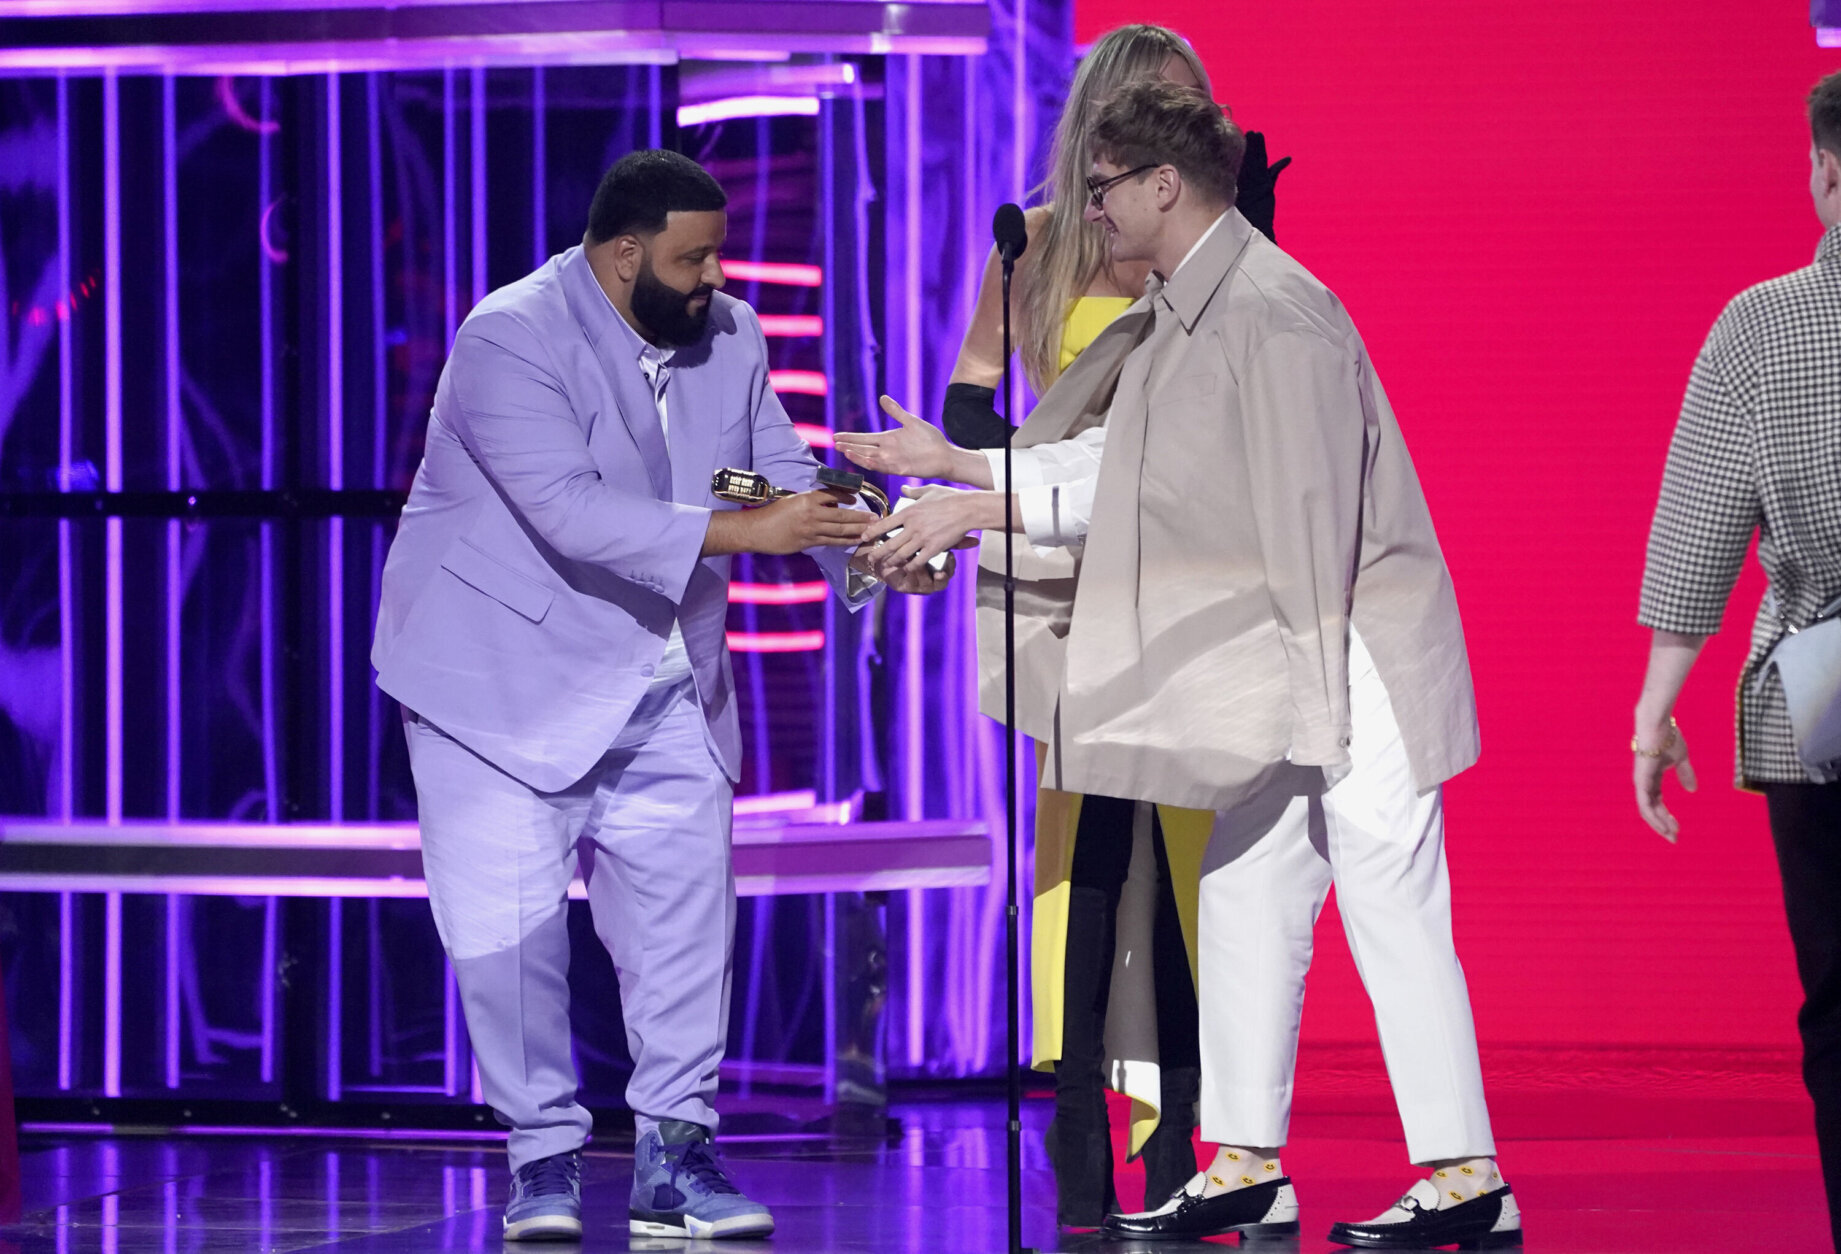 DJ Khaled, left, presents Dave Bayley of Glass Animals with the award for top rock artist at the Billboard Music Awards on Sunday, May 15, 2022, at the MGM Grand Garden Arena in Las Vegas. (AP Photo/Chris Pizzello)